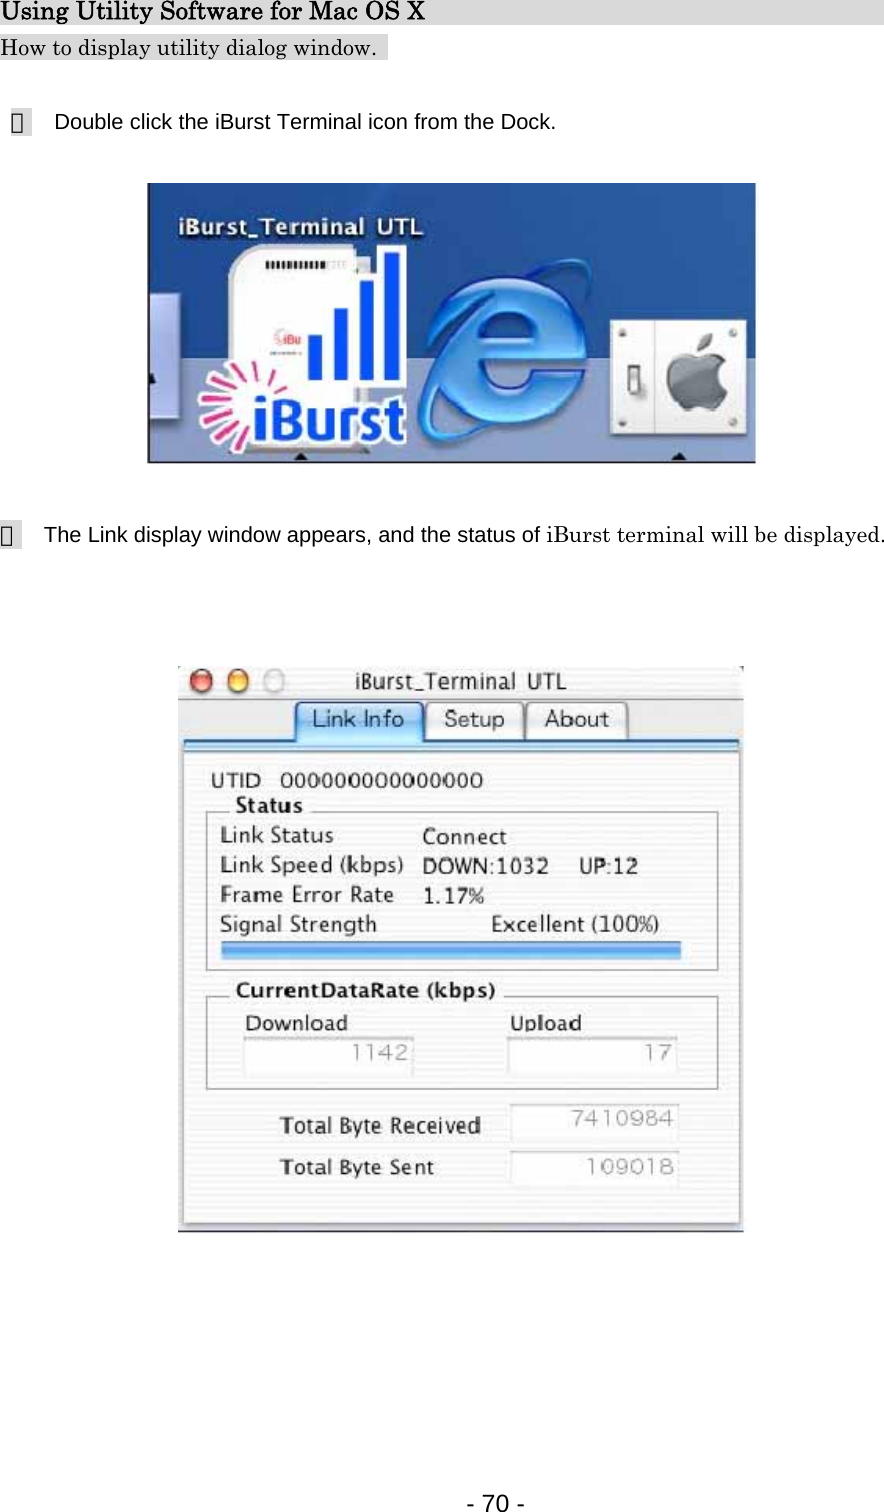 Using Utility Software for Mac OS X                                    How to display utility dialog window.     １  Double click the iBurst Terminal icon from the Dock.            ２  The Link display window appears, and the status of iBurst terminal will be displayed.                         - 70 -  